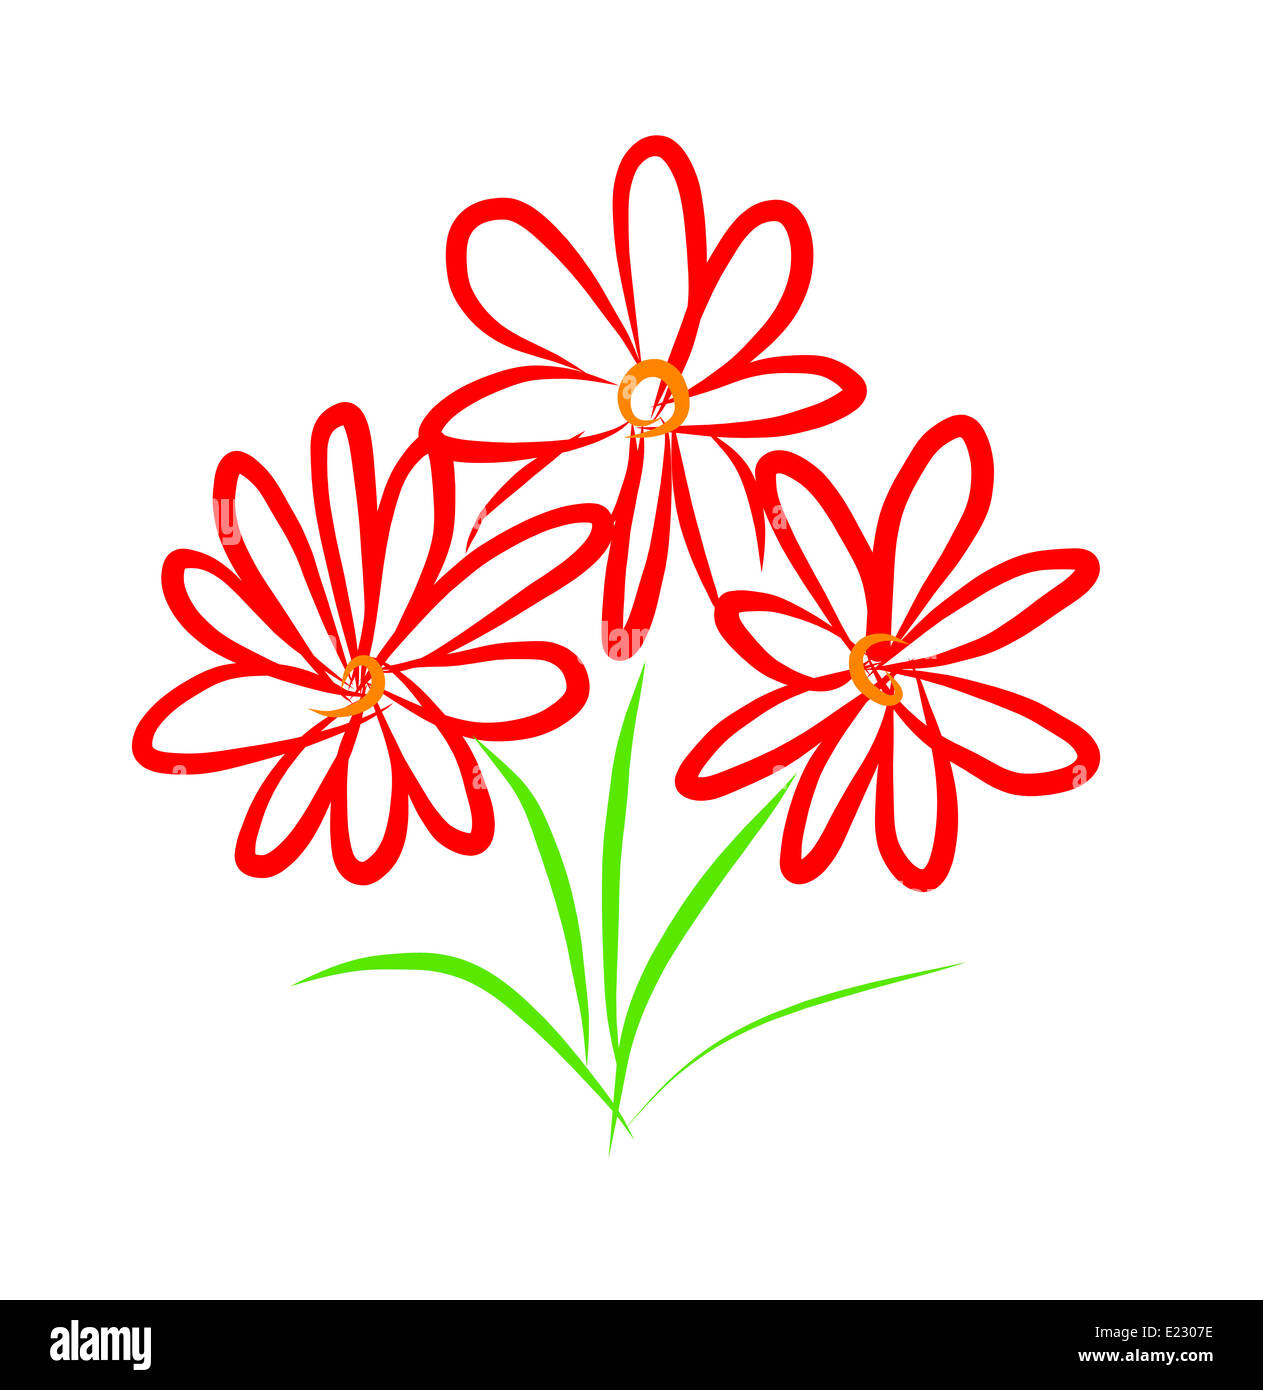 Illustration of a flowering plant Stock Photo